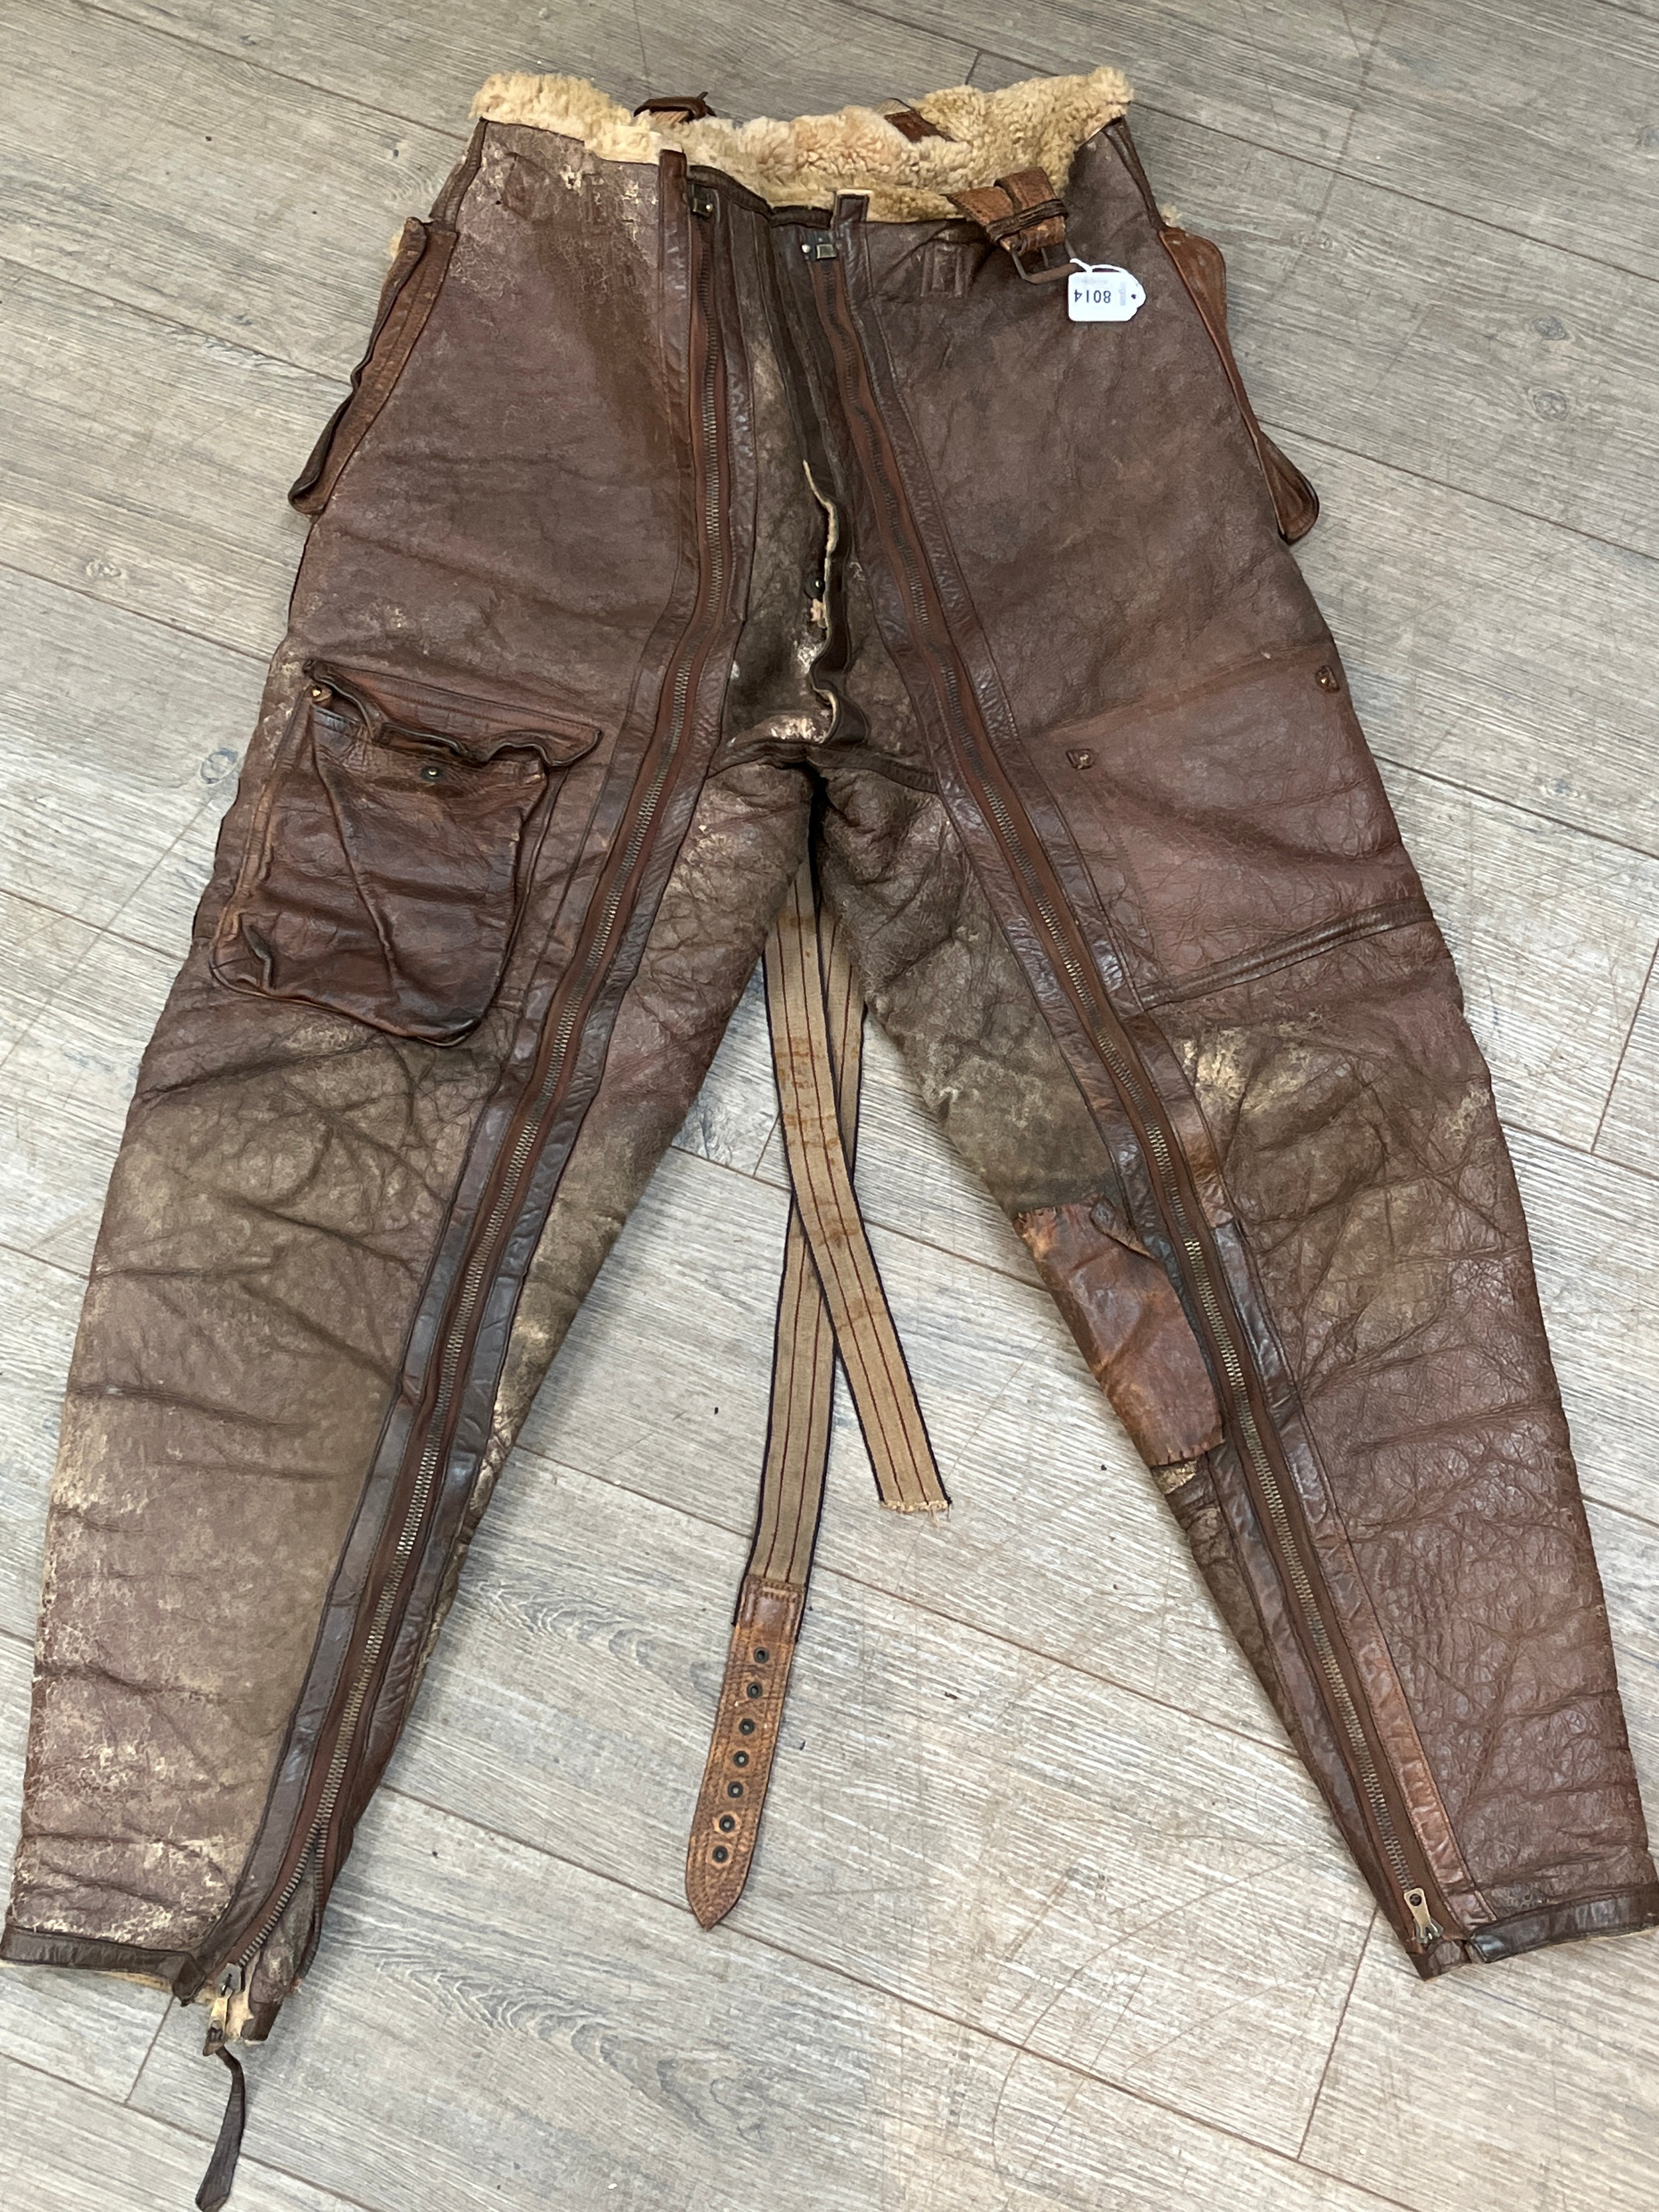 A WWII pair of Irvin sheepskin leggings, the straps marked SGT. E. WILLIAMSON